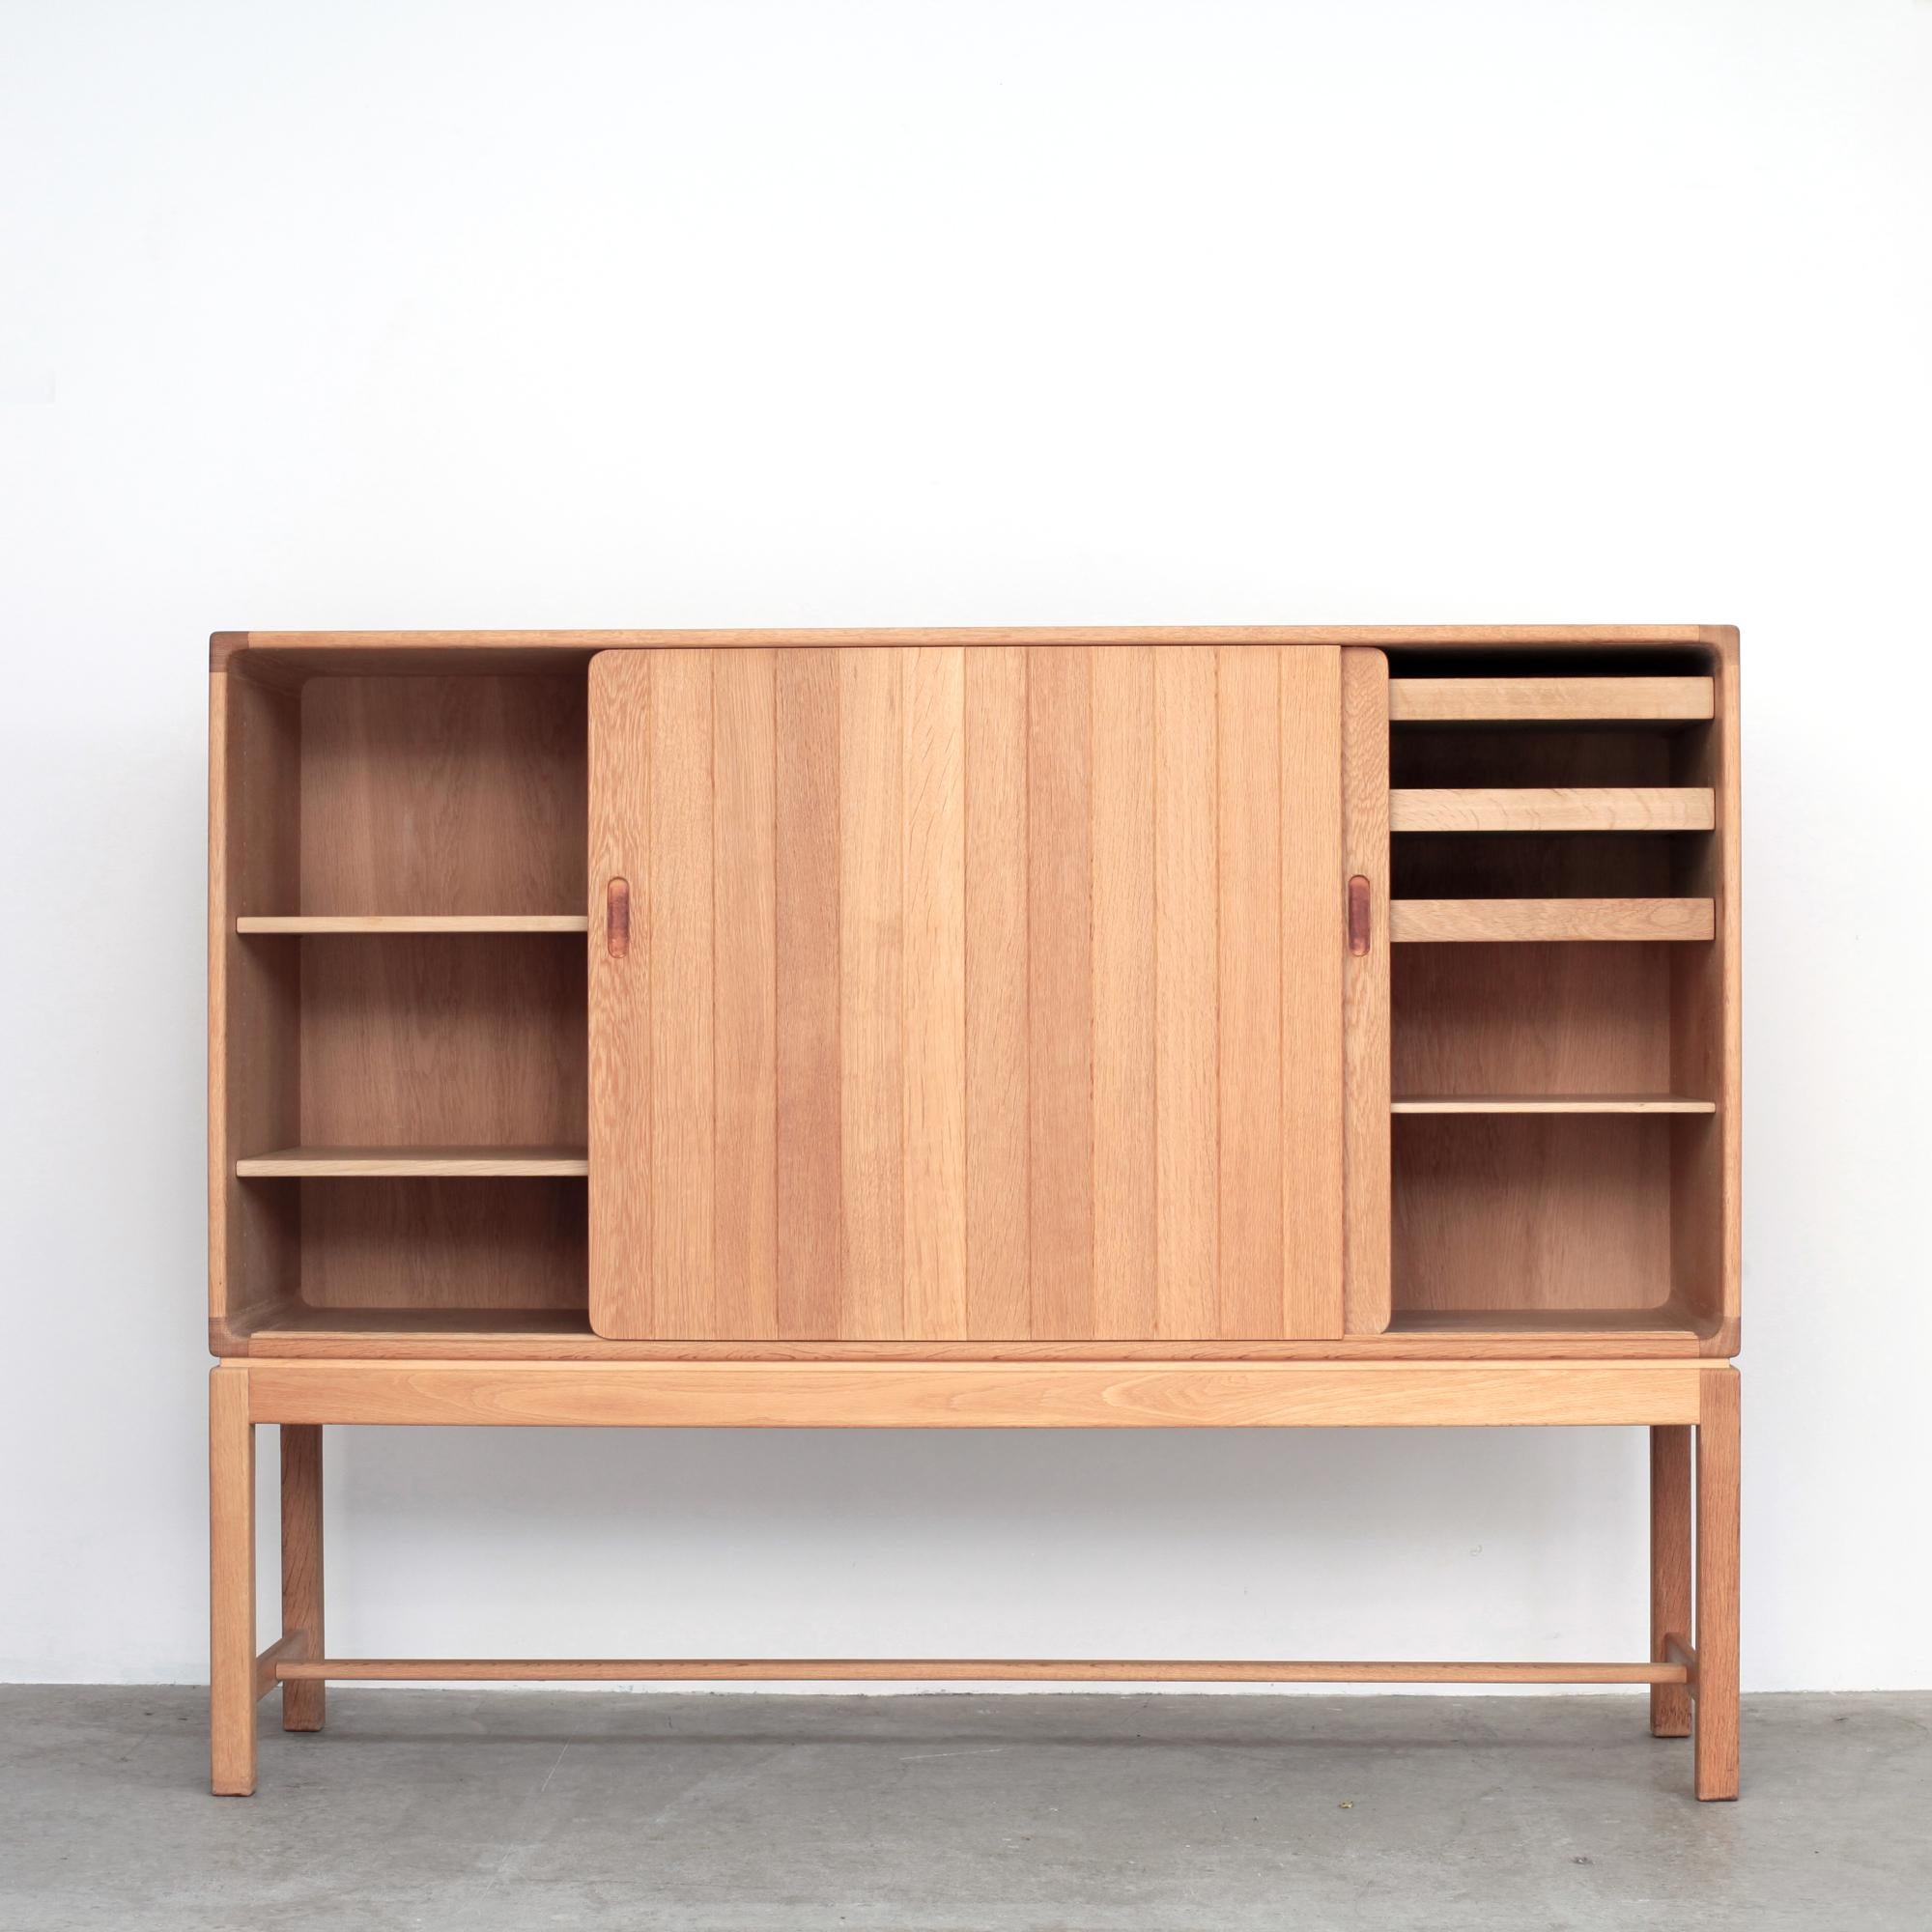 Rare light oak cabinet by Kurt Østervig for KP Mobler. Denmark 1970s.
Two sliding doors with handles covered in leather,
3 drawers and 5 height-adjustable shelves.